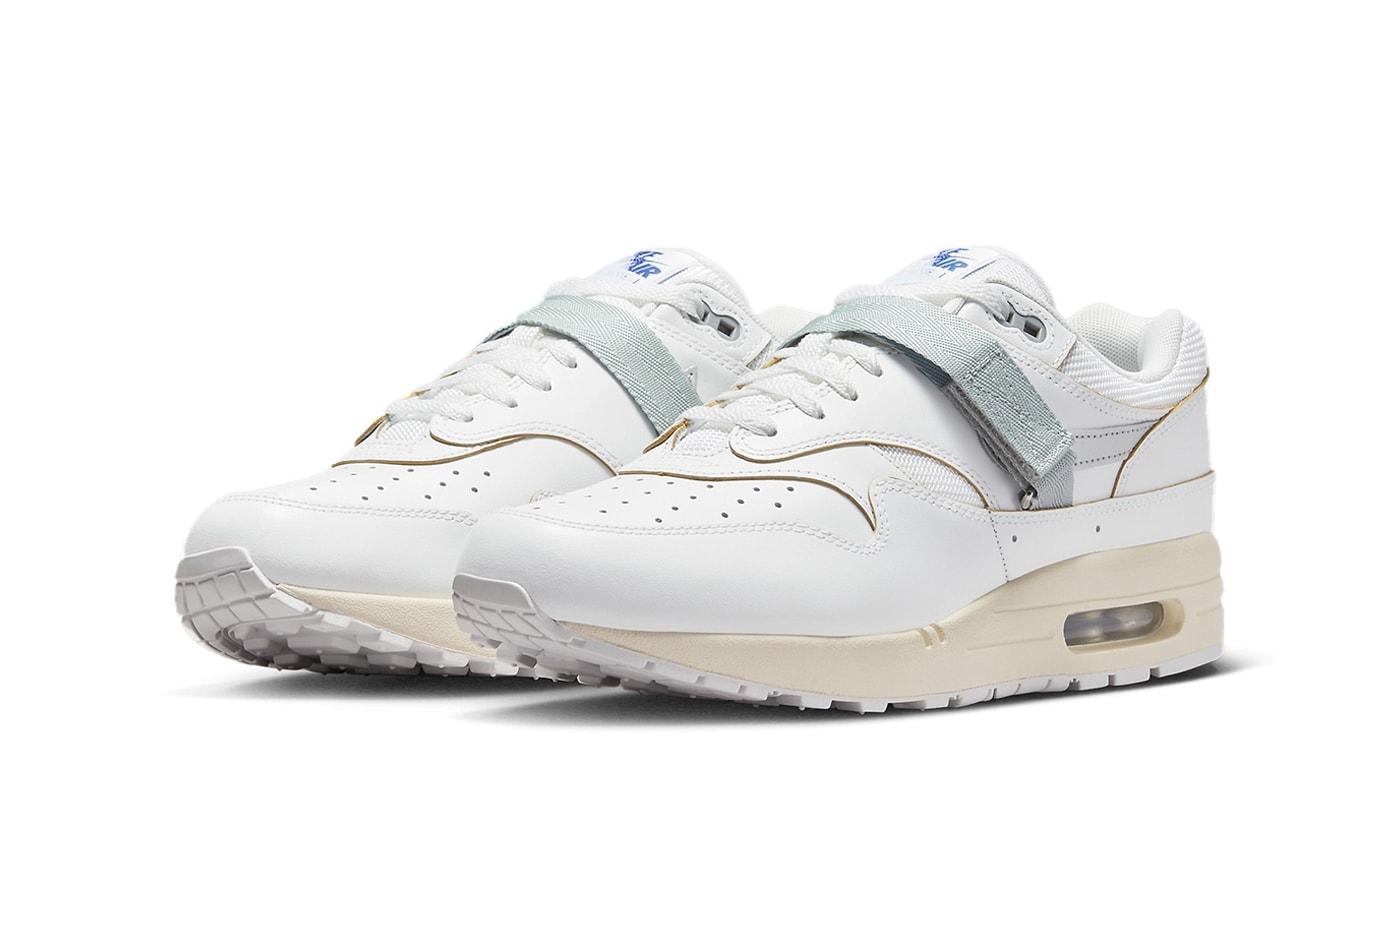 Nike Air Max 1 Timeless white tinker hatfield thick strap sunburst release info date price